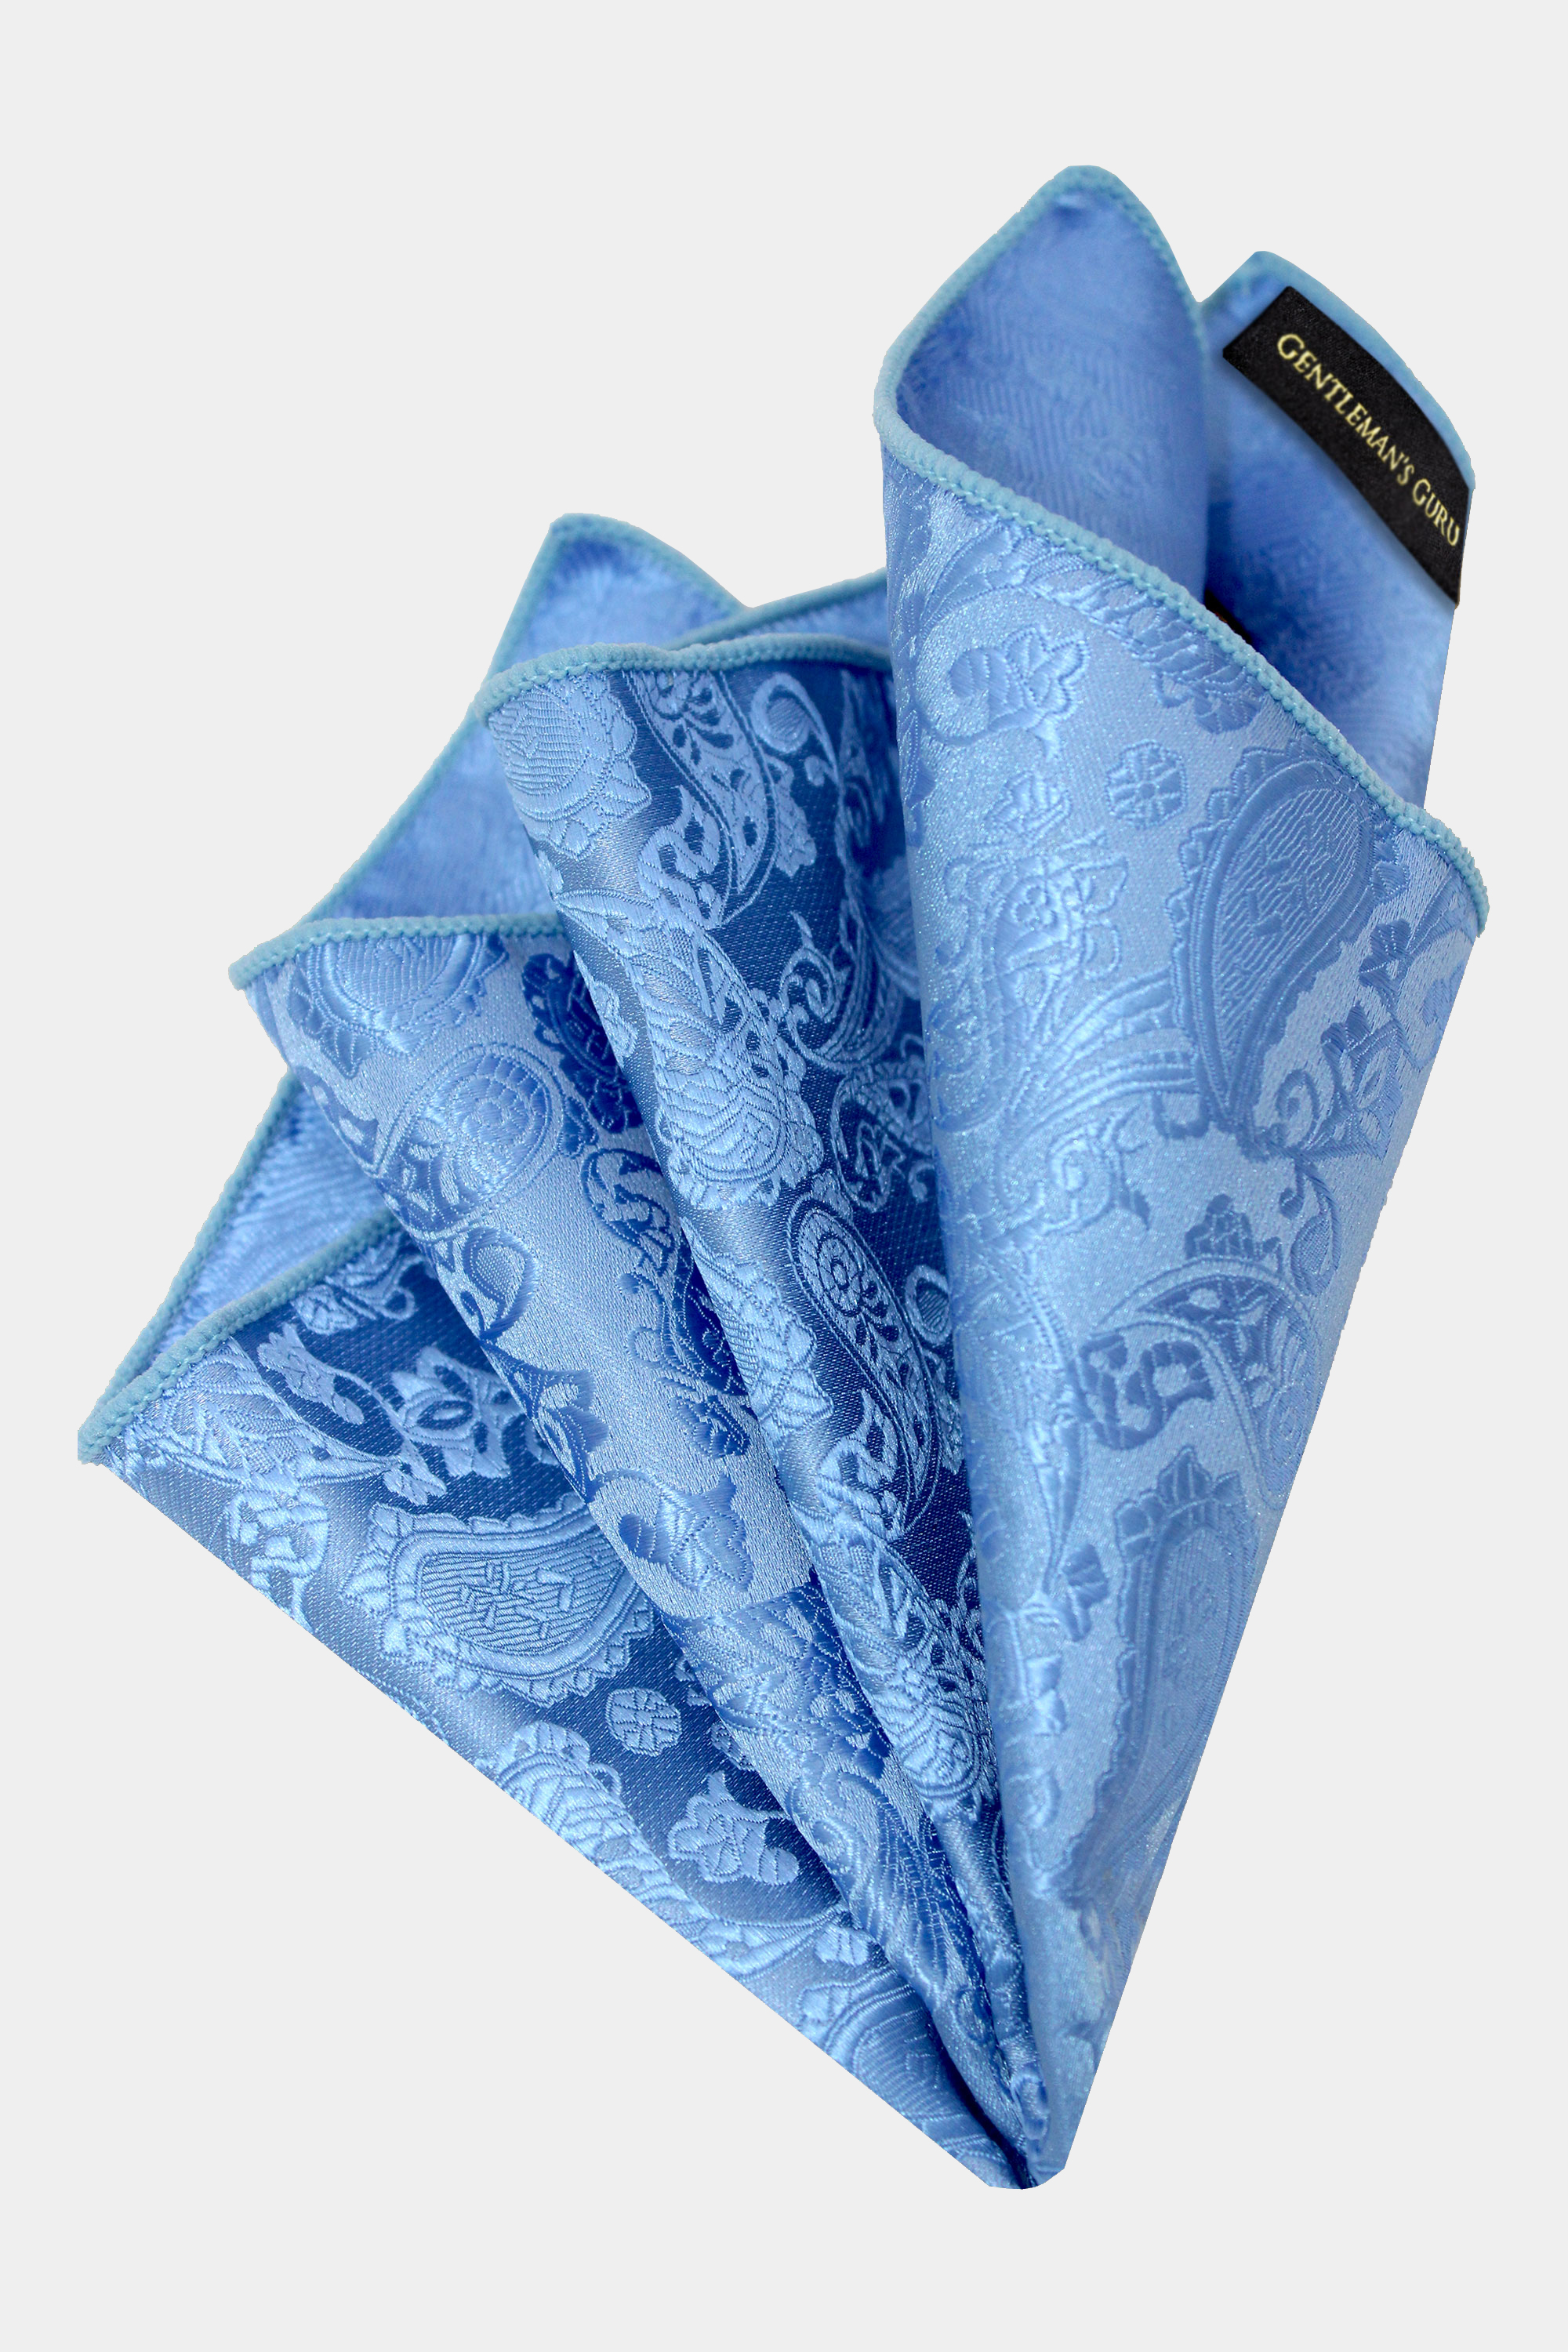 New Men's Polyester Woven pocket square hankie only turquoise blue paisley prom 